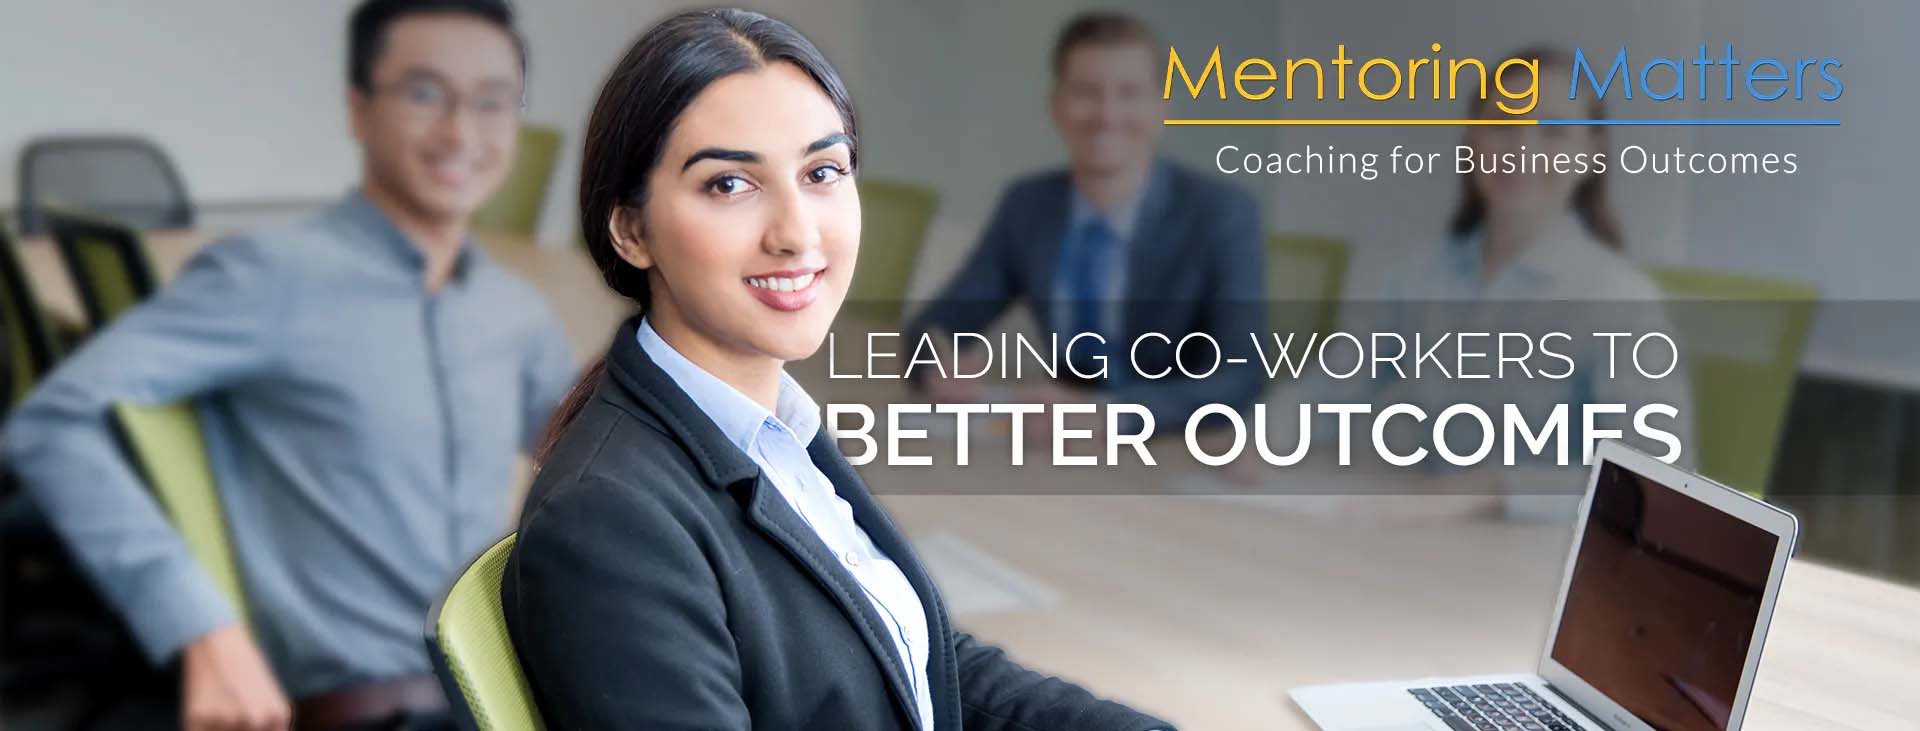 Mentoring Matters - Leading Co-Workers to Better Outcomes